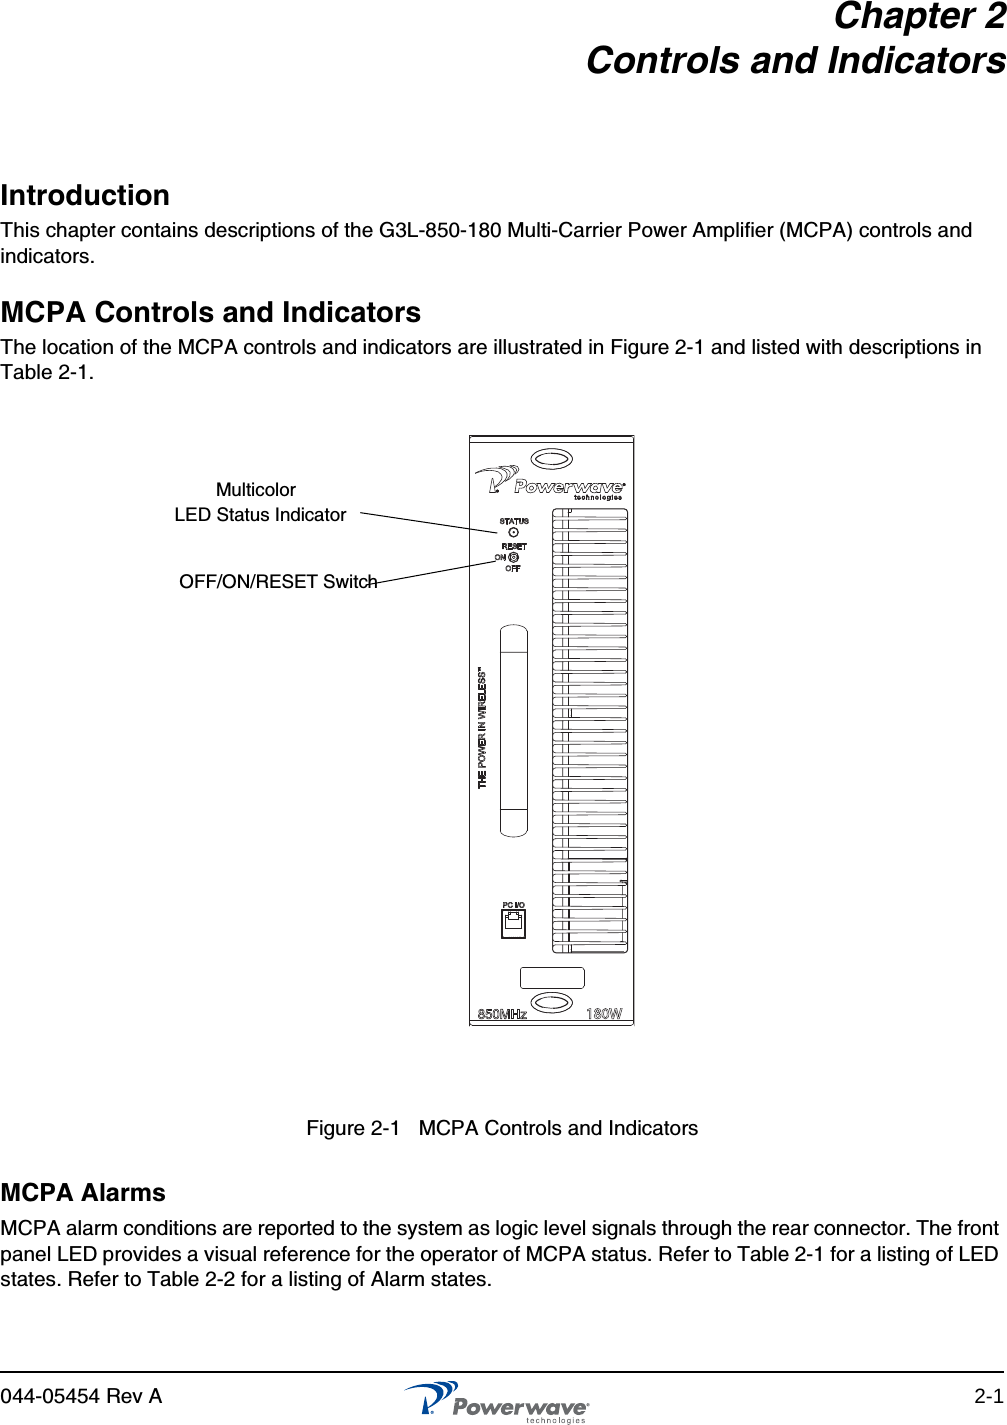 044-05454 Rev A 2-1Chapter 2Controls and IndicatorsIntroductionThis chapter contains descriptions of the G3L-850-180 Multi-Carrier Power Amplifier (MCPA) controls and indicators.MCPA Controls and IndicatorsThe location of the MCPA controls and indicators are illustrated in Figure 2-1 and listed with descriptions in Table 2-1.MCPA AlarmsMCPA alarm conditions are reported to the system as logic level signals through the rear connector. The front panel LED provides a visual reference for the operator of MCPA status. Refer to Table 2-1 for a listing of LED states. Refer to Table 2-2 for a listing of Alarm states.180WFigure 2-1   MCPA Controls and Indicators MulticolorOFF/ON/RESET SwitchLED Status Indicator 